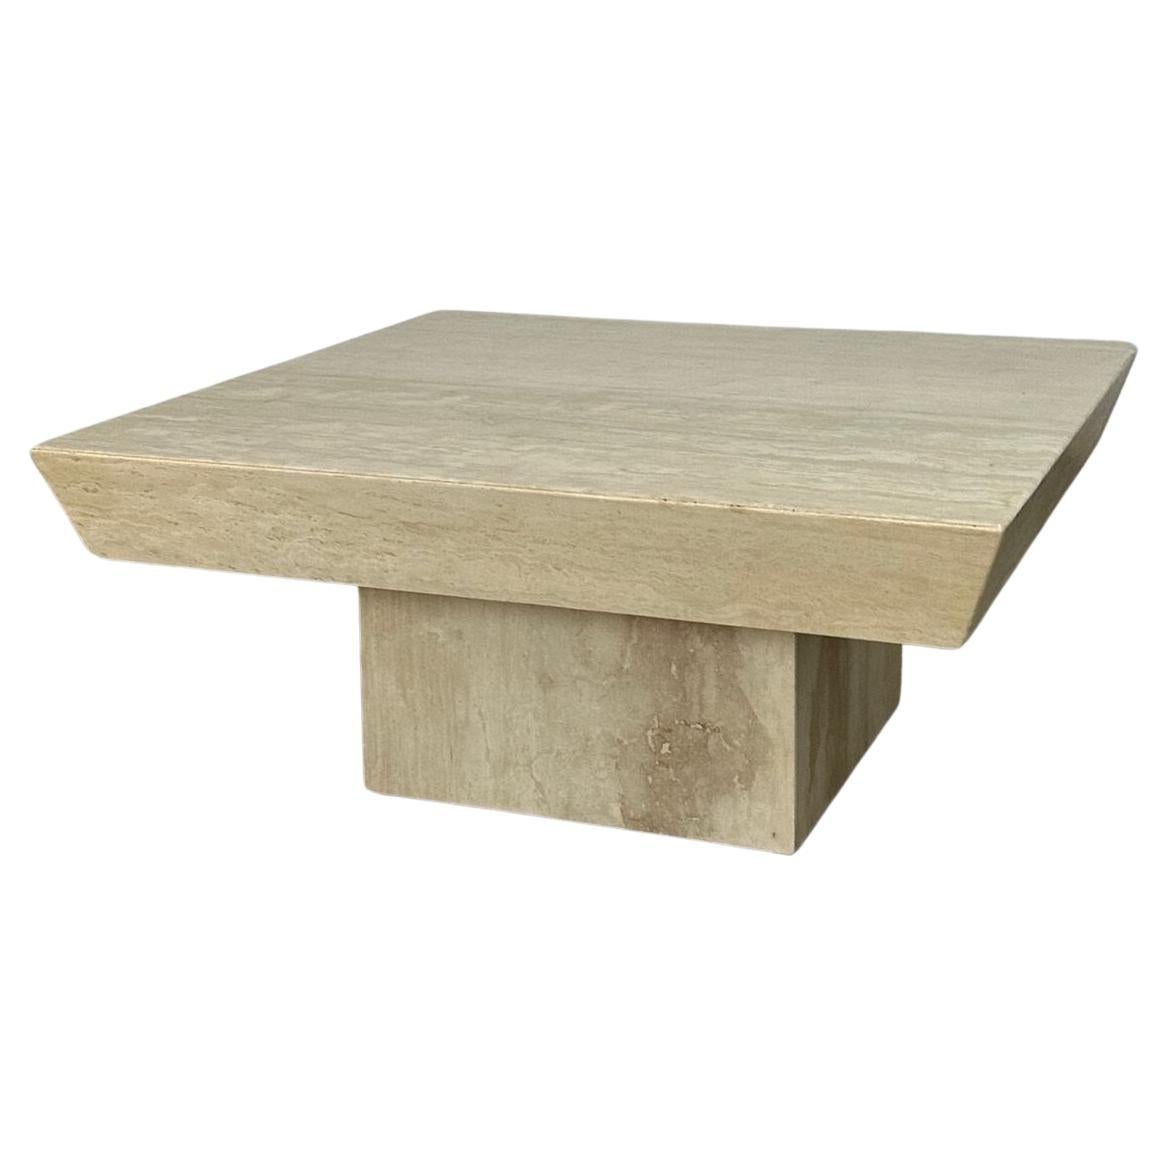 Travertine Beveled Edge Coffee Table For Sale